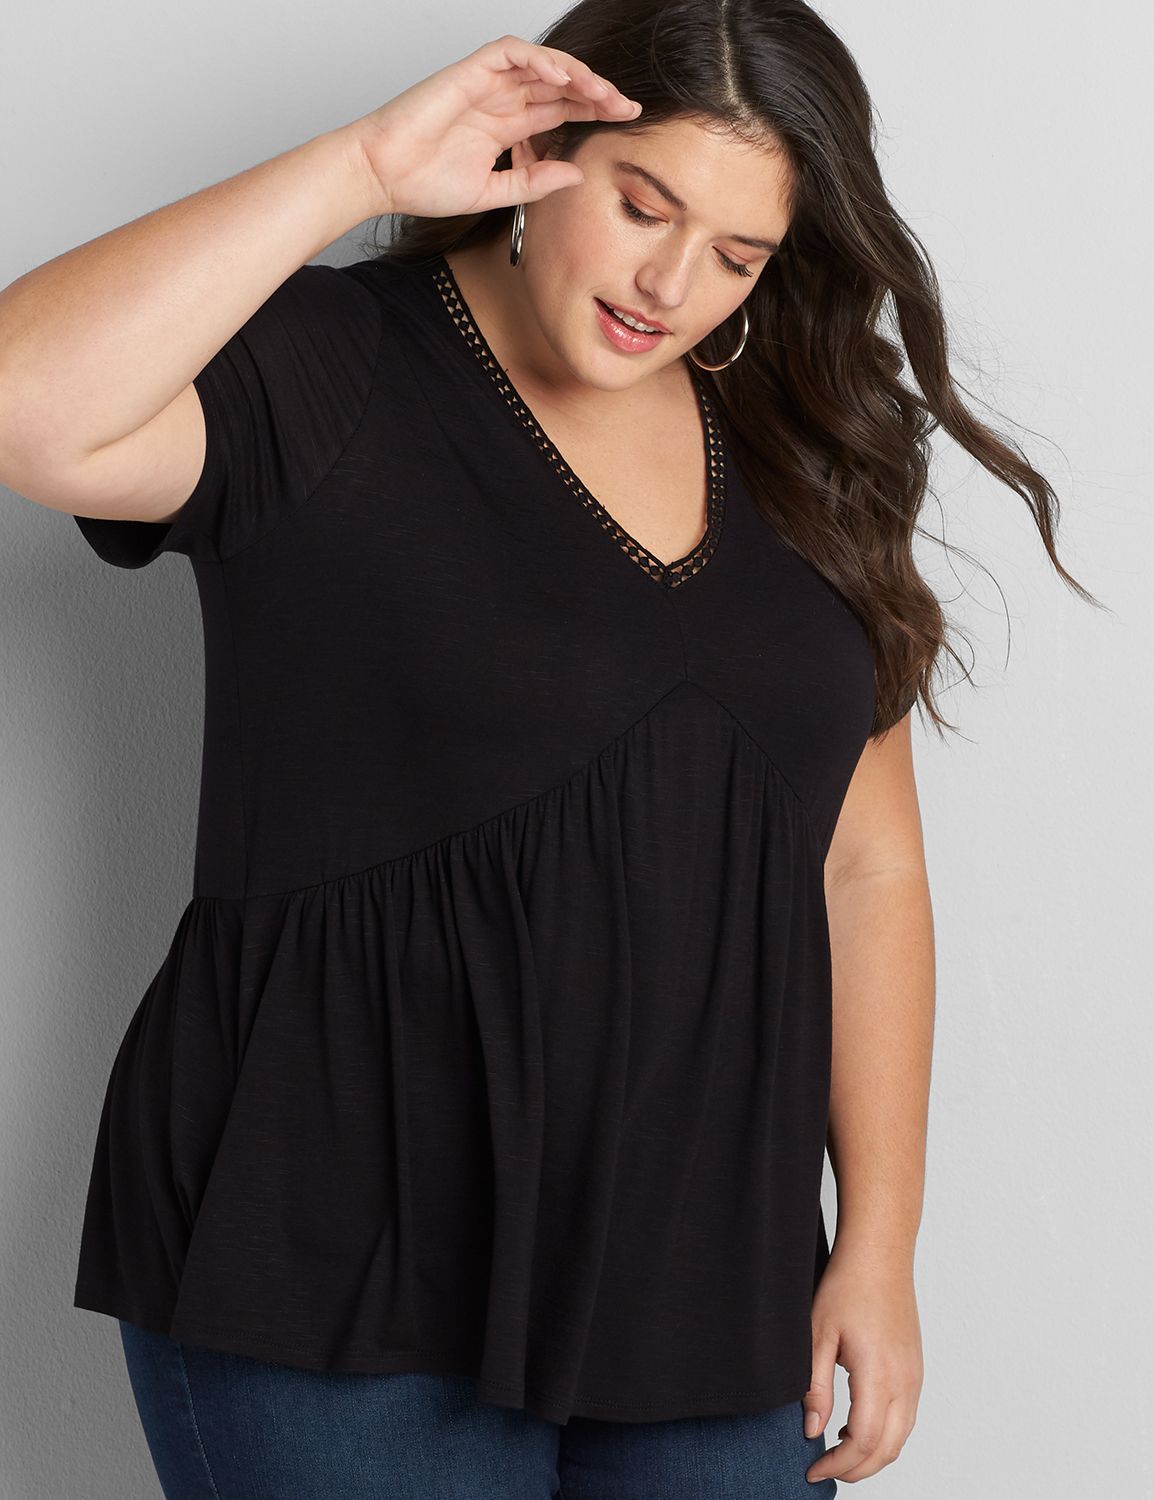 Lane Bryant Women's Embroidered Babydoll Max Swing Tee 18/20 Black